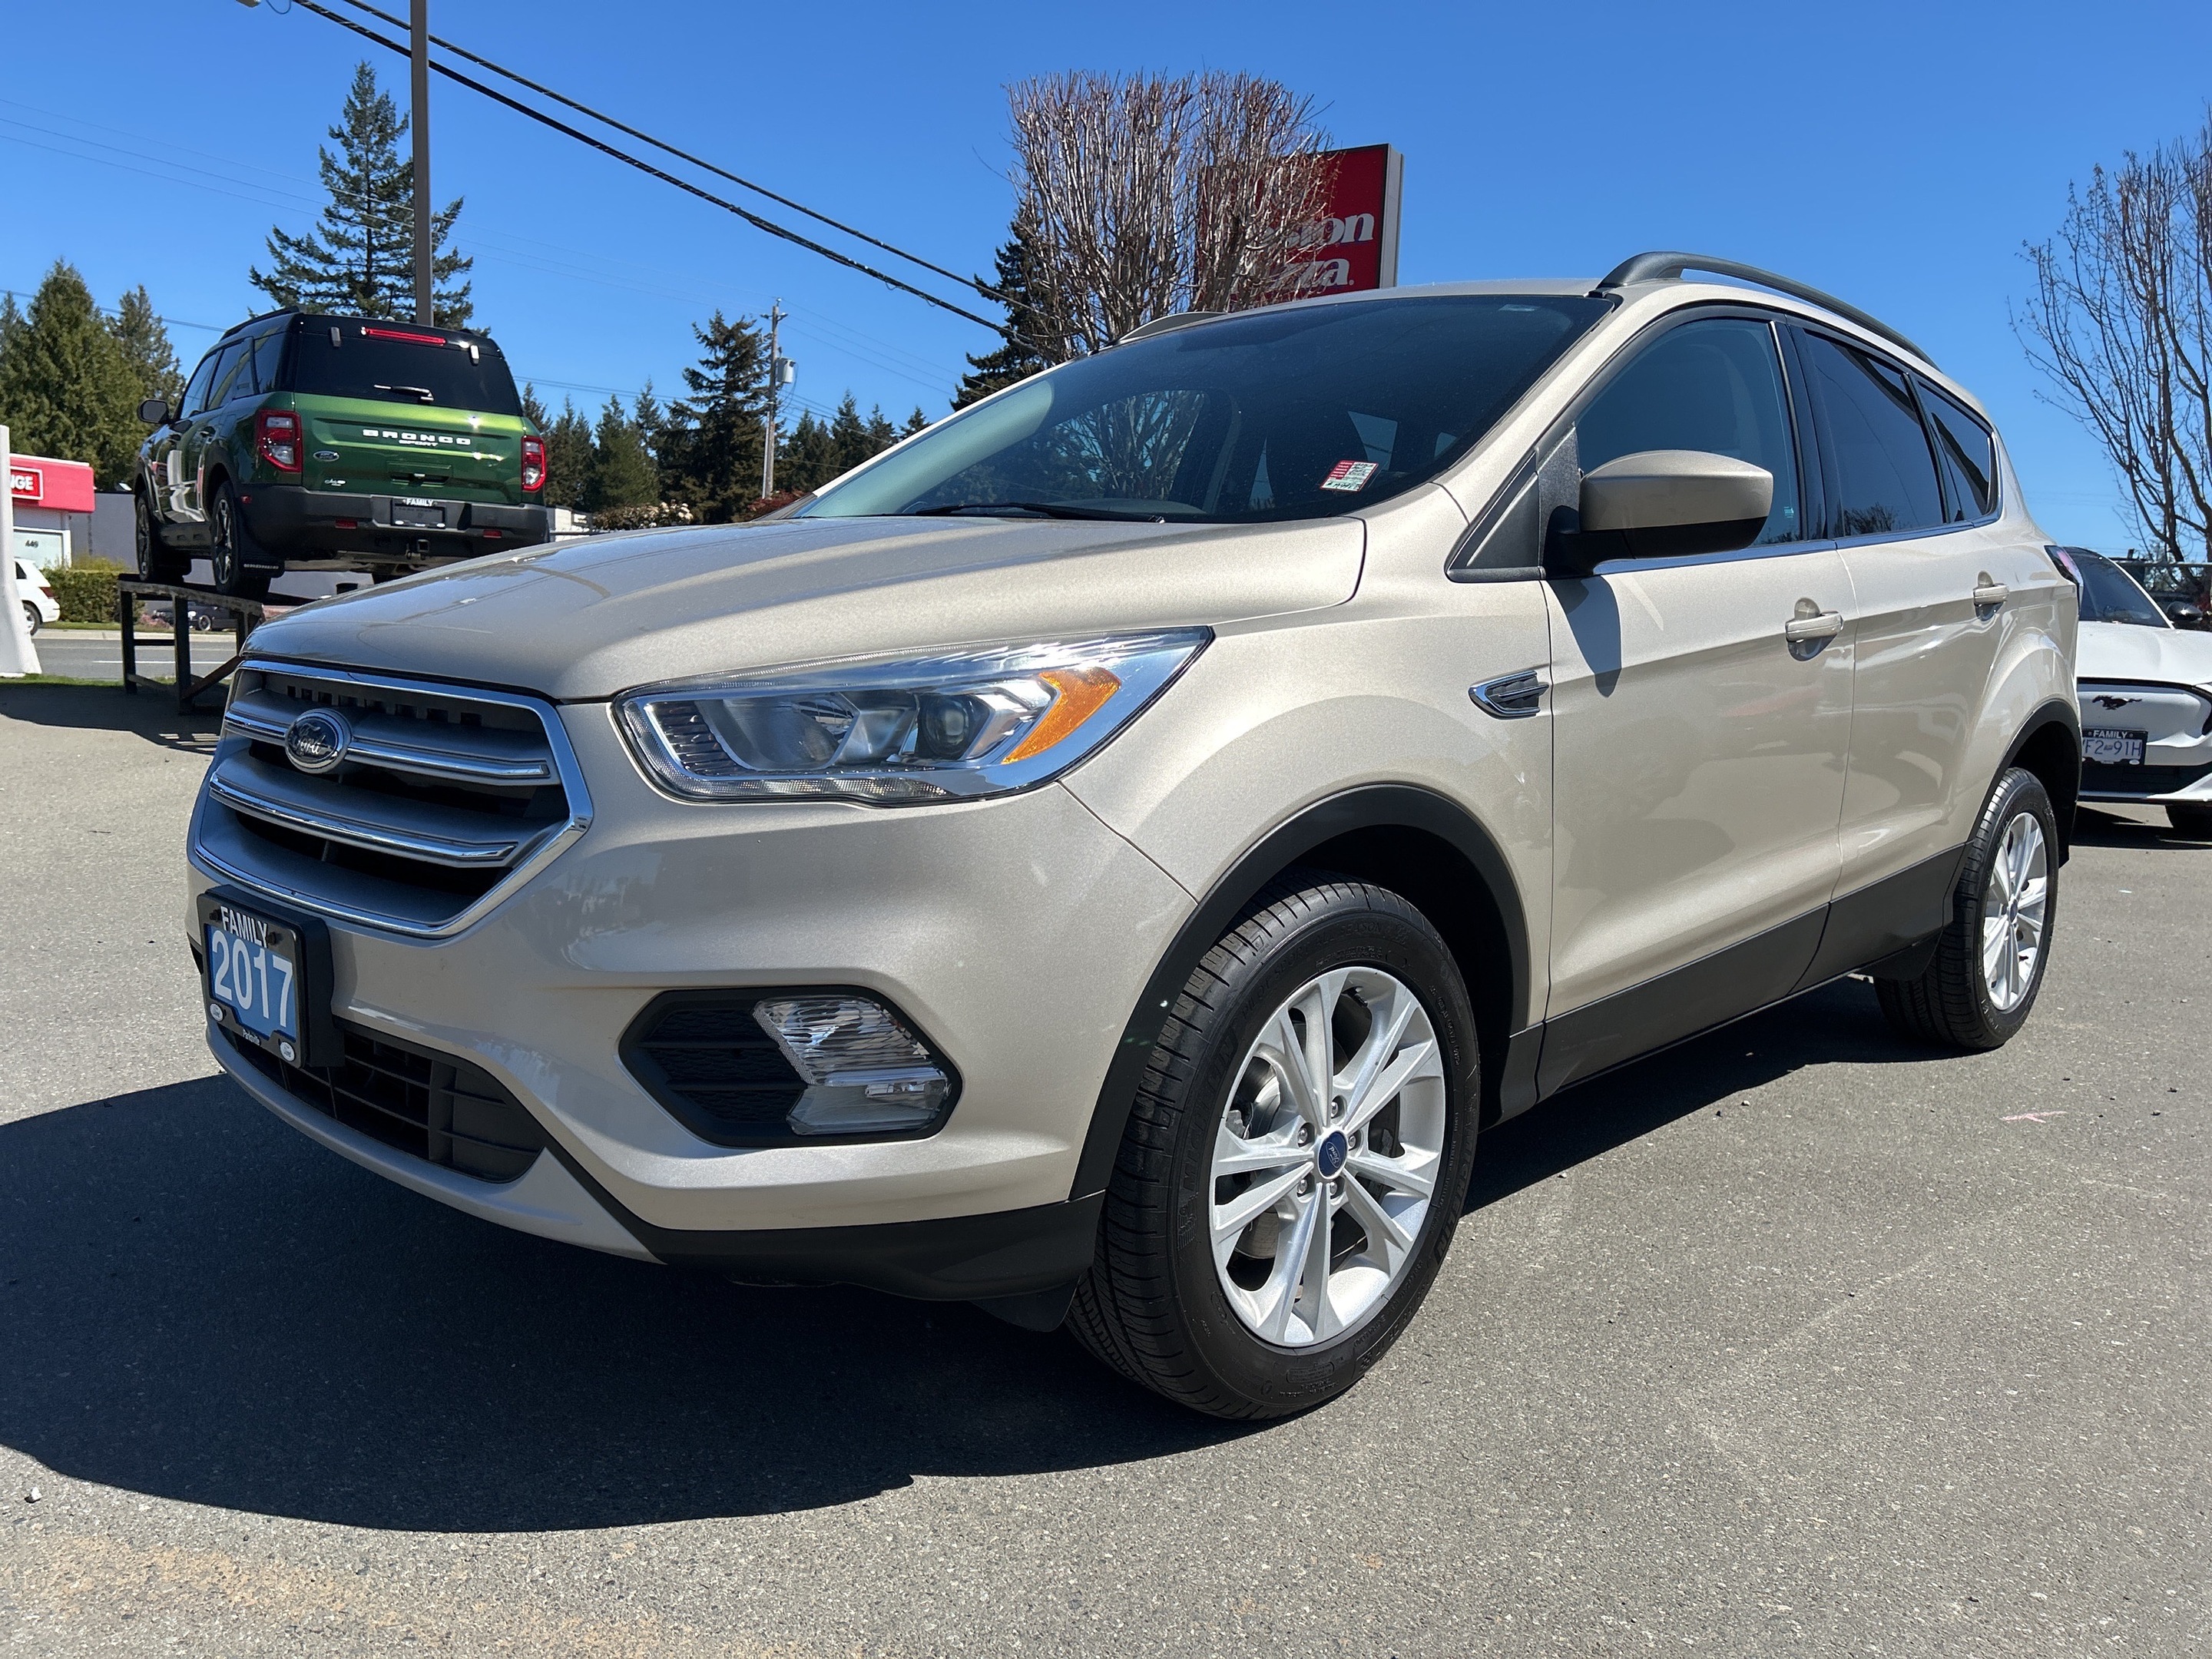 2017 Ford Escape FWD | Sunroof | Navigation | PWR Liftgate 